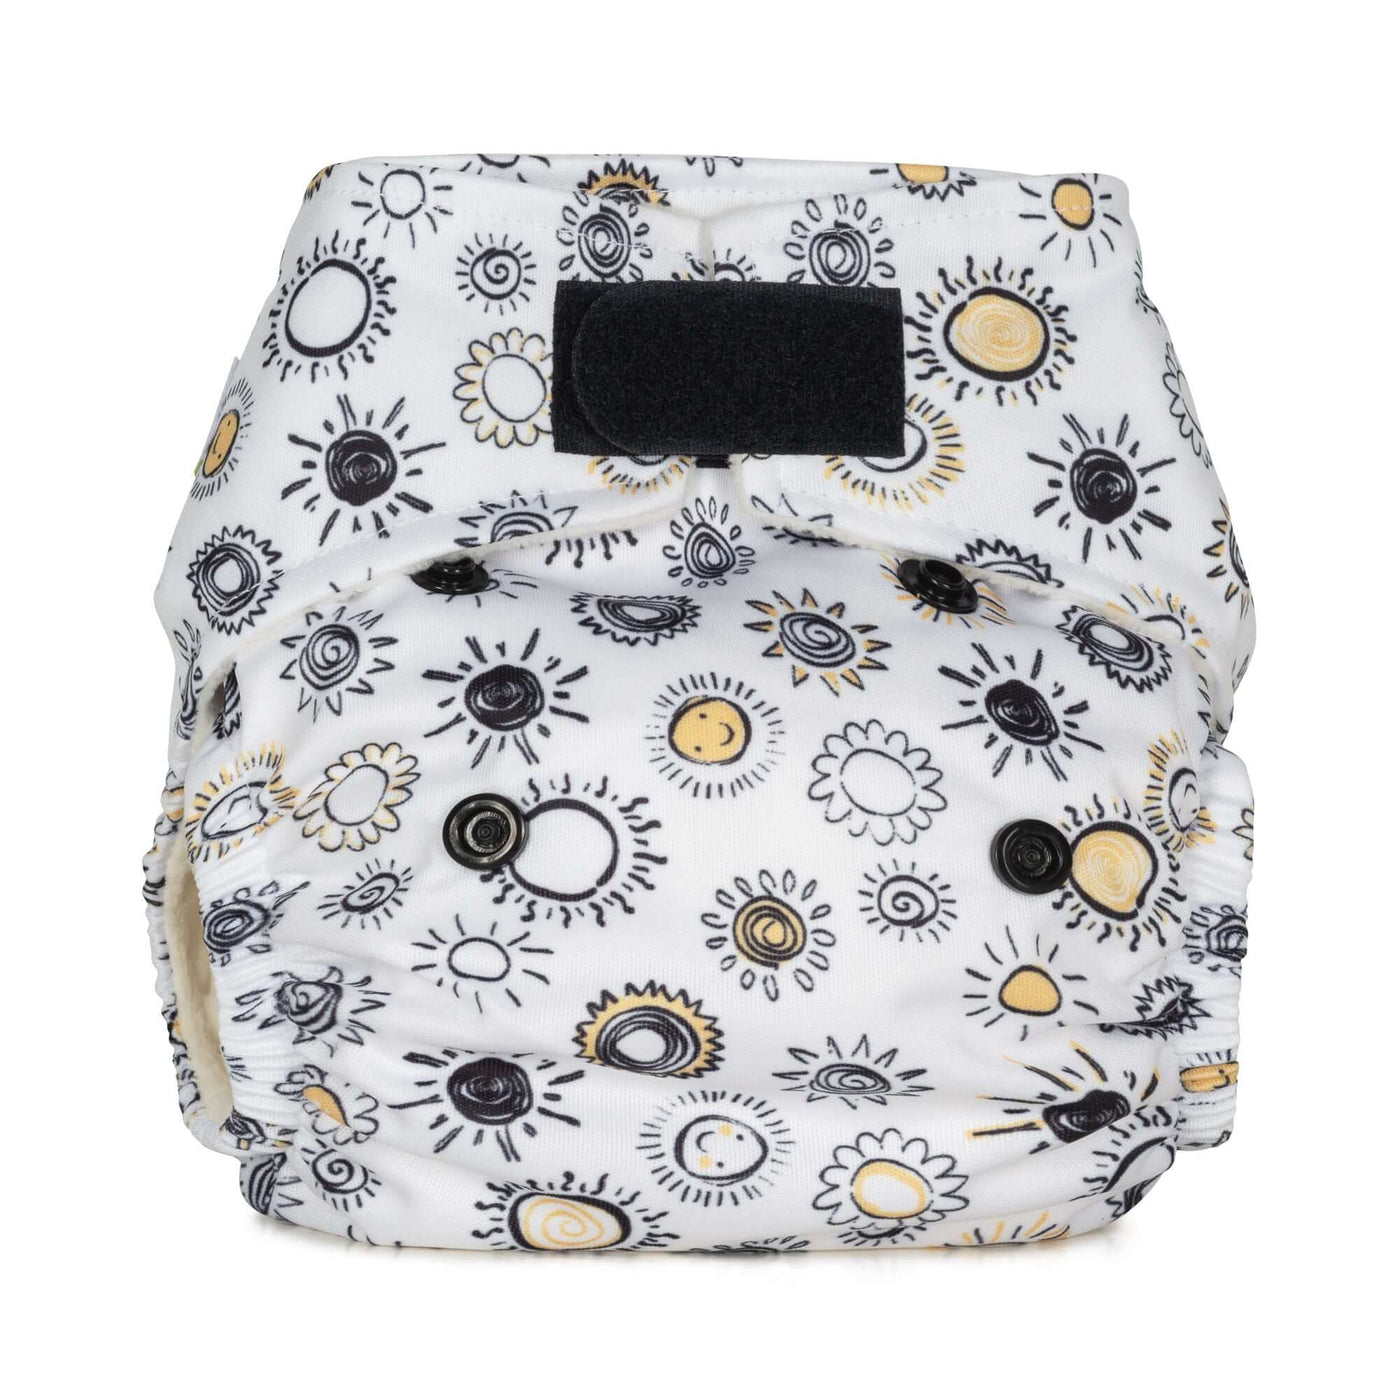 Baba + Boo Newborn Reusable Nappy - Prints Colour: Sunshine reusable nappies all in one nappies Earthlets